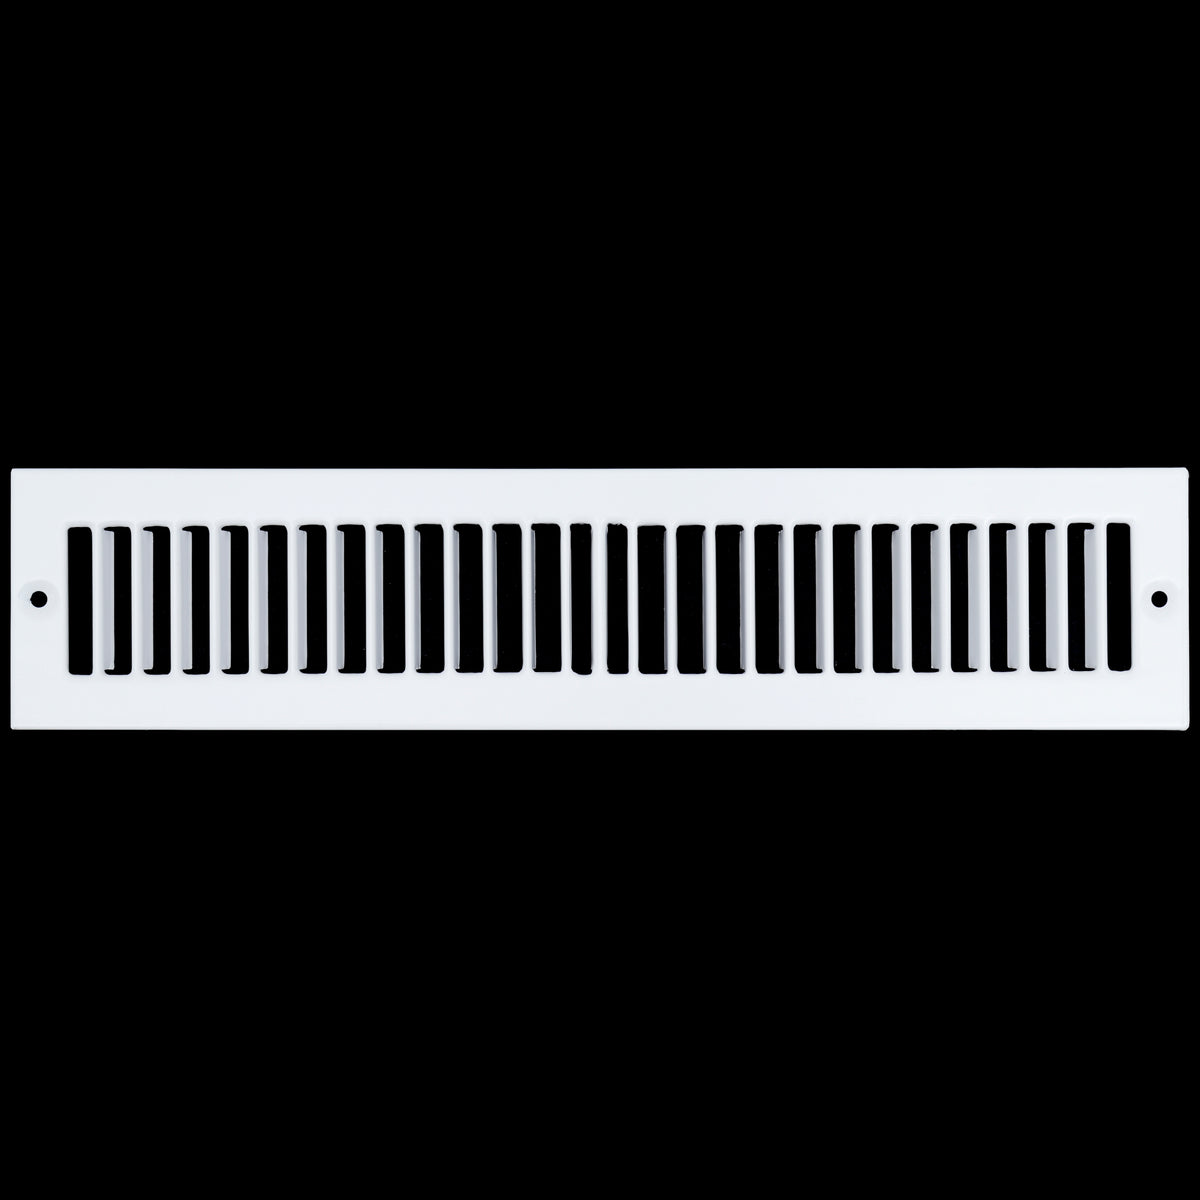 airgrilles 2" x 14" toe kick register grille   vent cover   outer dimensions: 3.5" x 15.5"   white hnd-tgs-wh-2x14  - 1